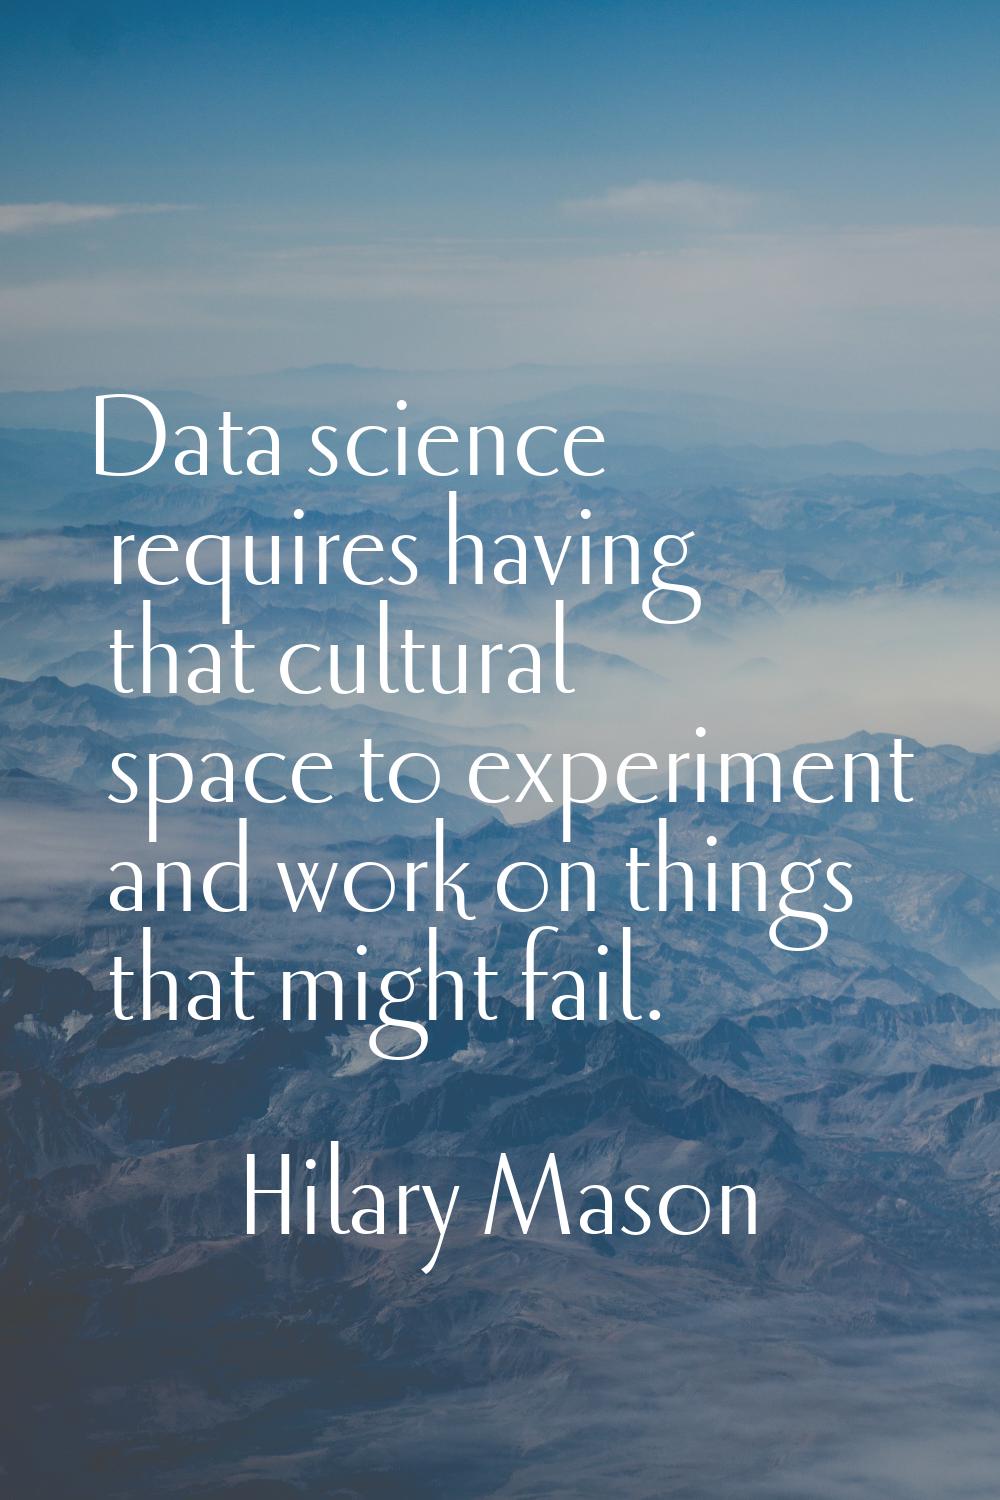 Data science requires having that cultural space to experiment and work on things that might fail.